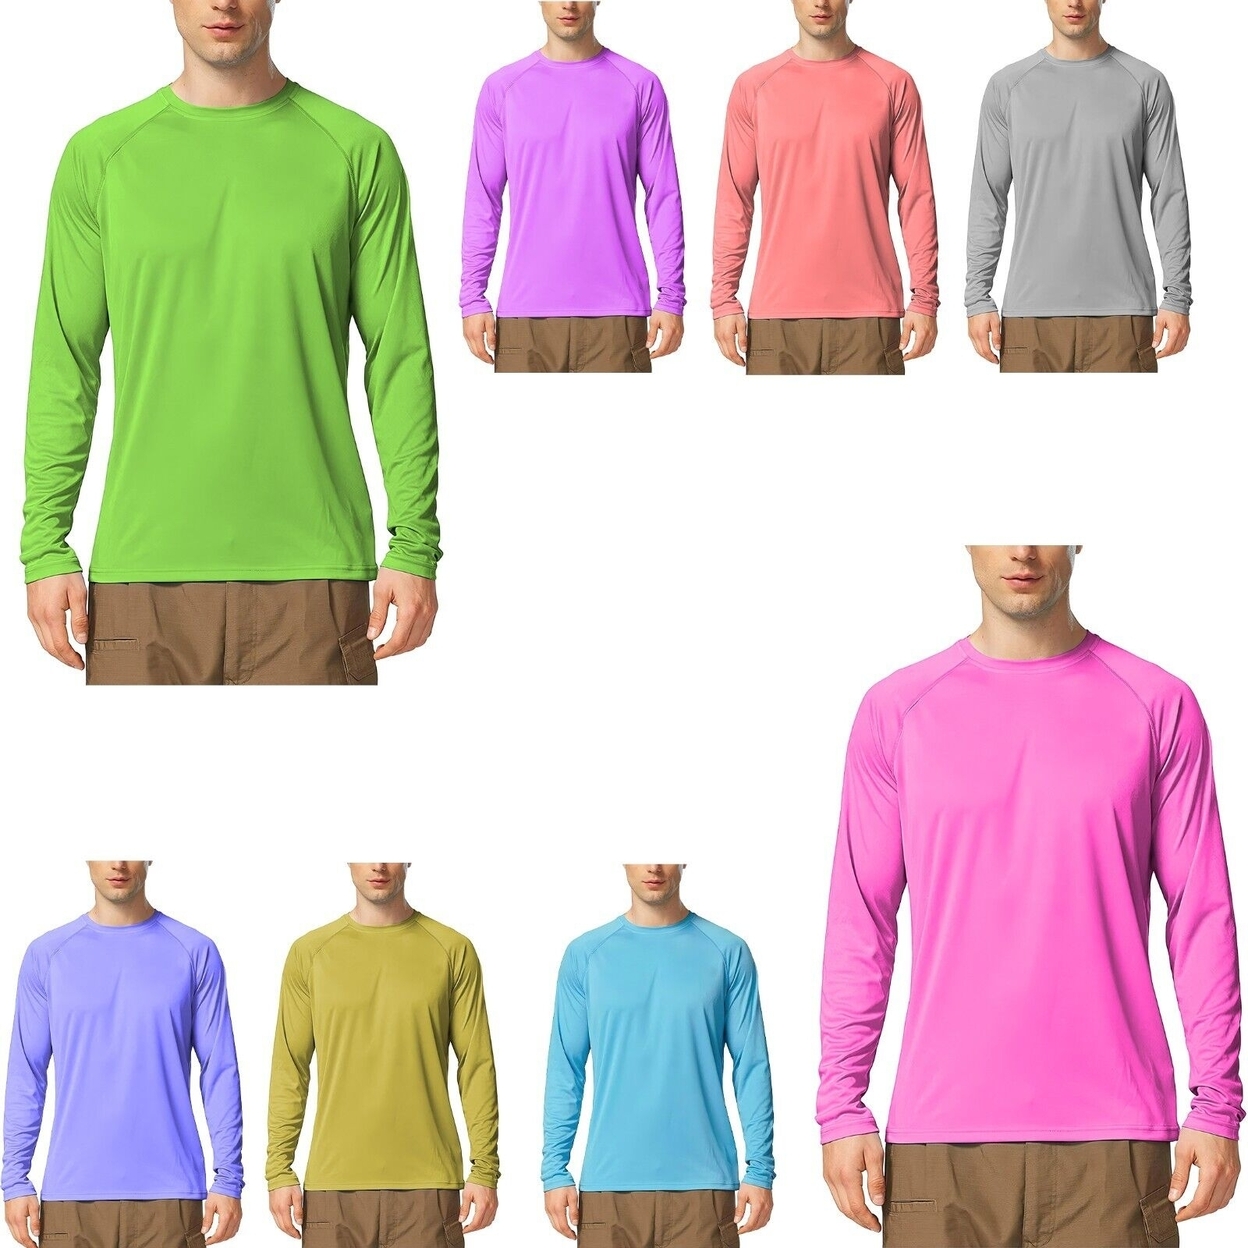 4-Pack: Men's Dri-Fit Moisture Wicking Athletic Cool Performance Slim Fit Long Sleeve T-Shirts - Small